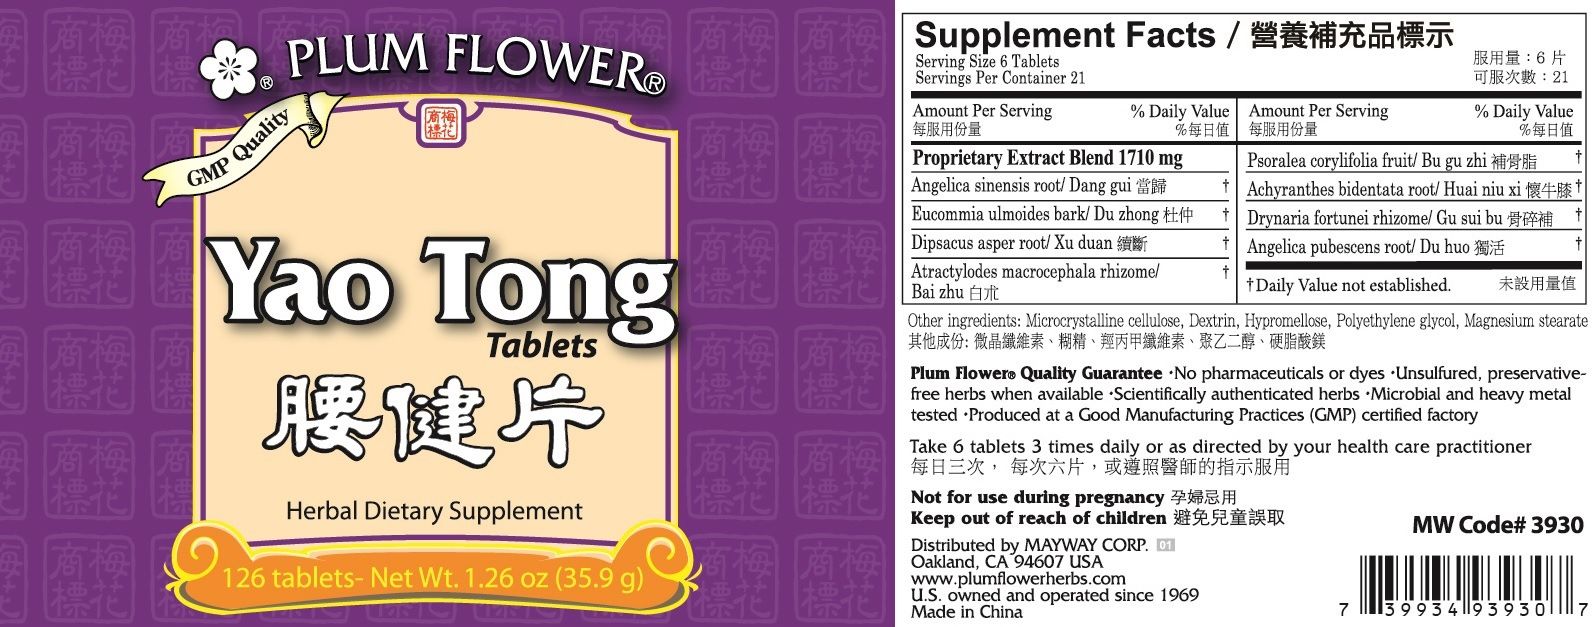 Tao Tong Tablets - Plum Flower Label